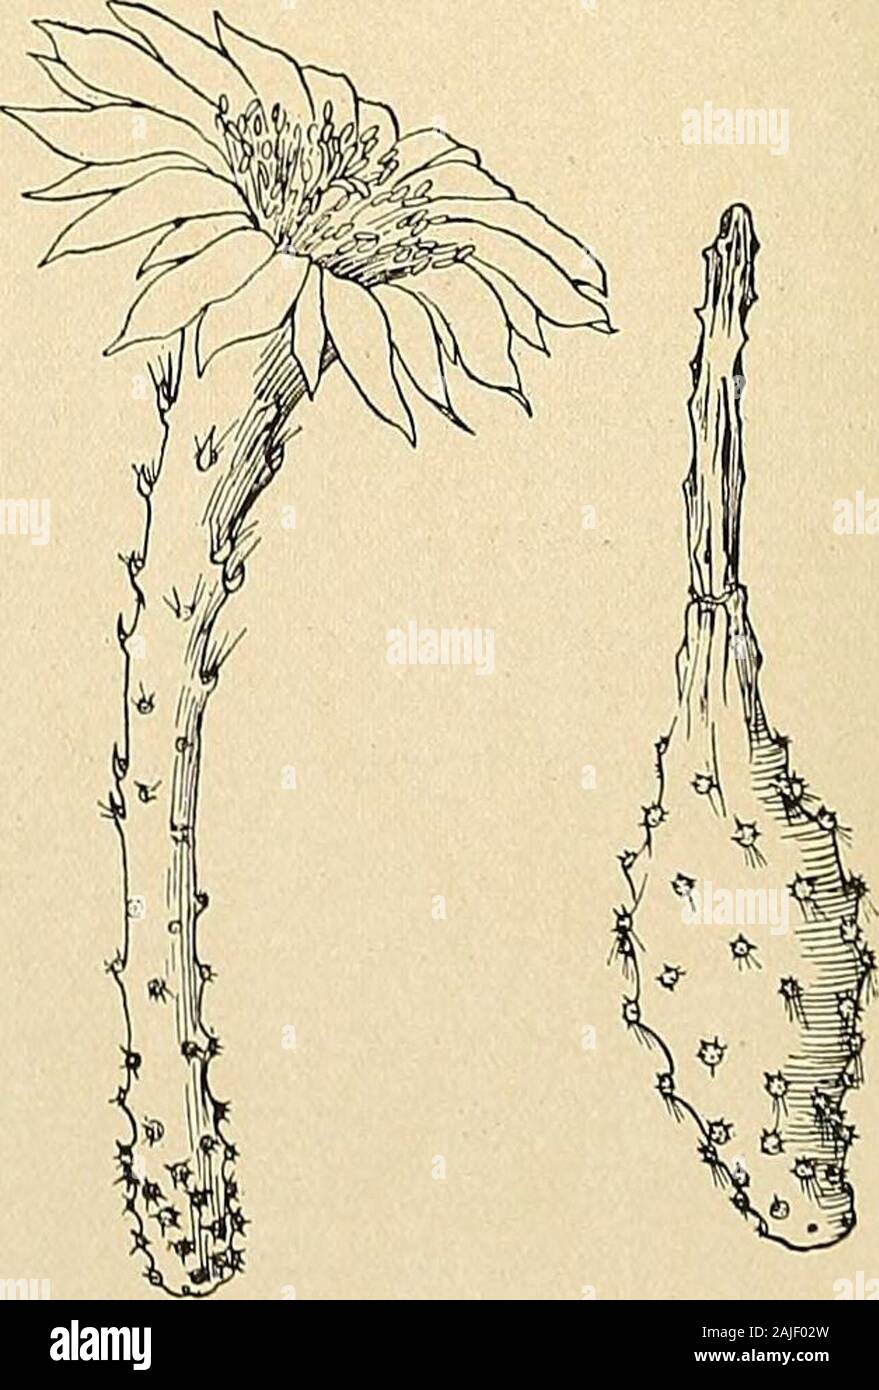 The Cactaceae : descriptions and illustrations of plants of the cactus family . Fig. 167.—Flower of Peniocereus greggii. X0.5.Fig. 168.—Fruit of same. X0.5., DENDROCEREUS. II3 In the southwest it is called deerhorn cactus or night-blooming cereus. The petals were first described as pale purple, but this was probably incorrect. The species is found occasionally in valleys and on mesas in its range, but is neverabundant. It is hard for the novice to find, as the short, dull-colored stems resemble deadsticks or the common sage bush, while the large flowers appear only at night. Mrs. W. R. Kitt in Stock Photo